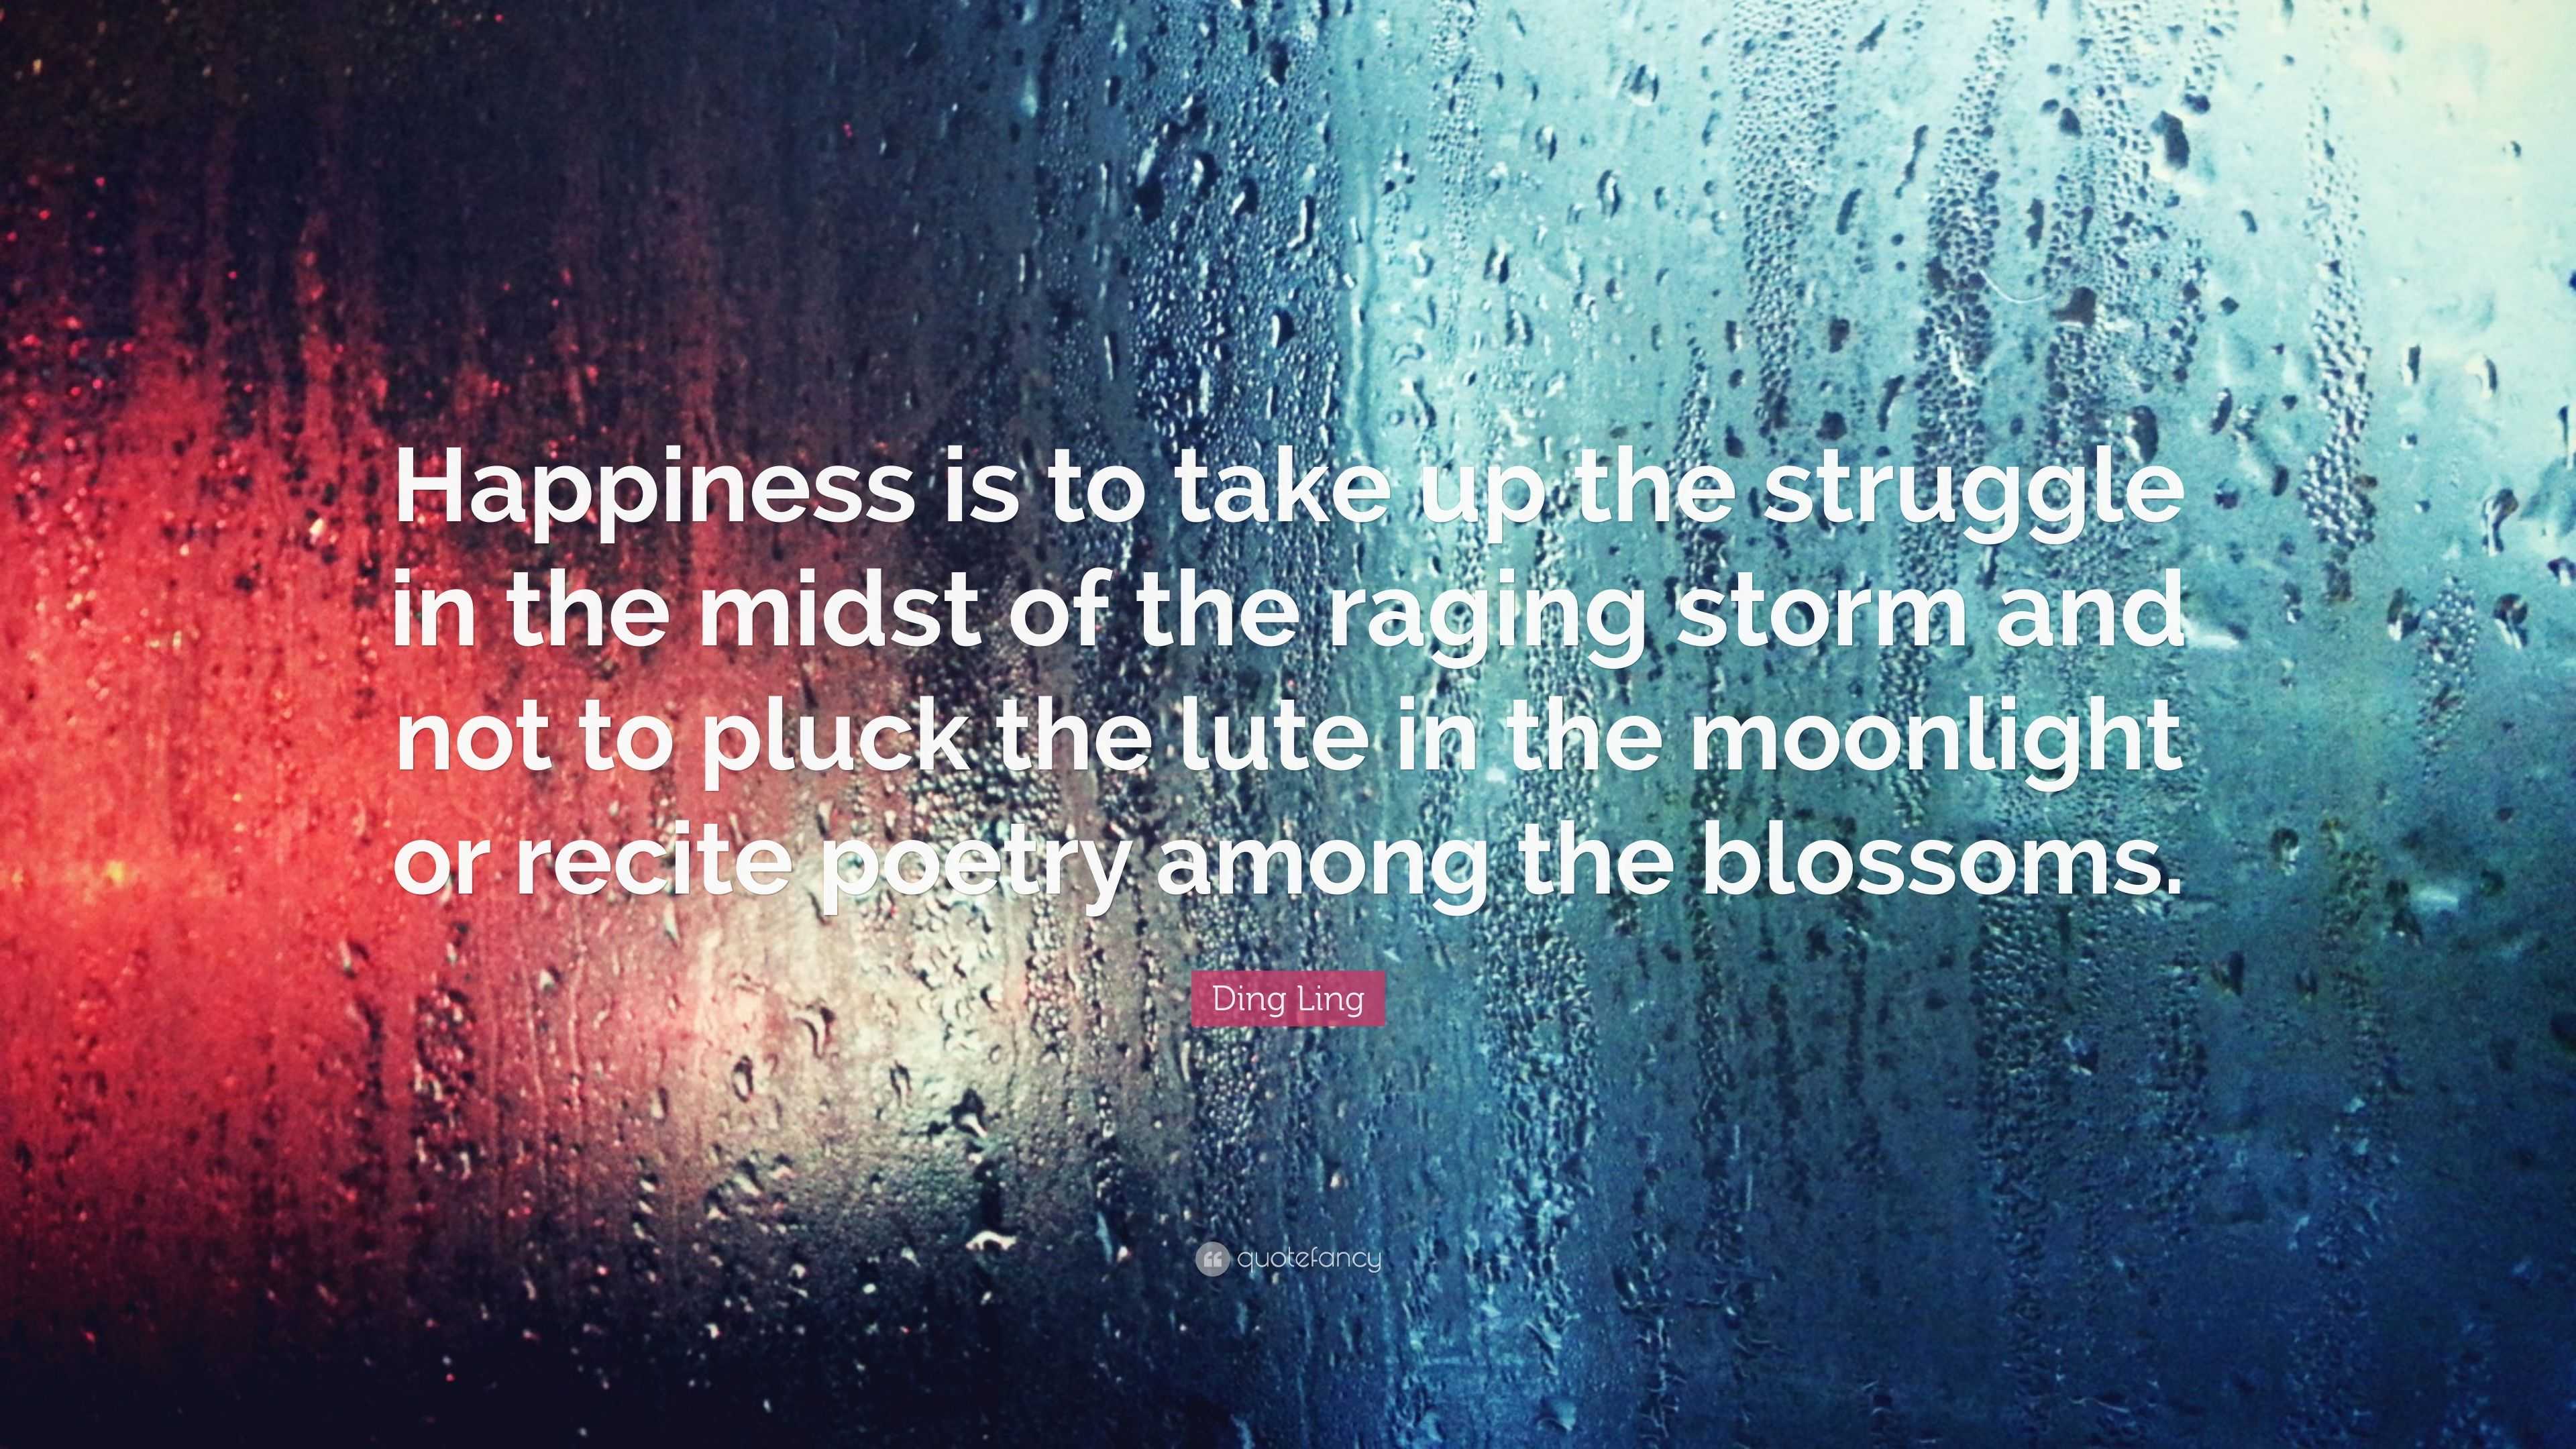 I am the storm that rages on - The Happiness Contagion